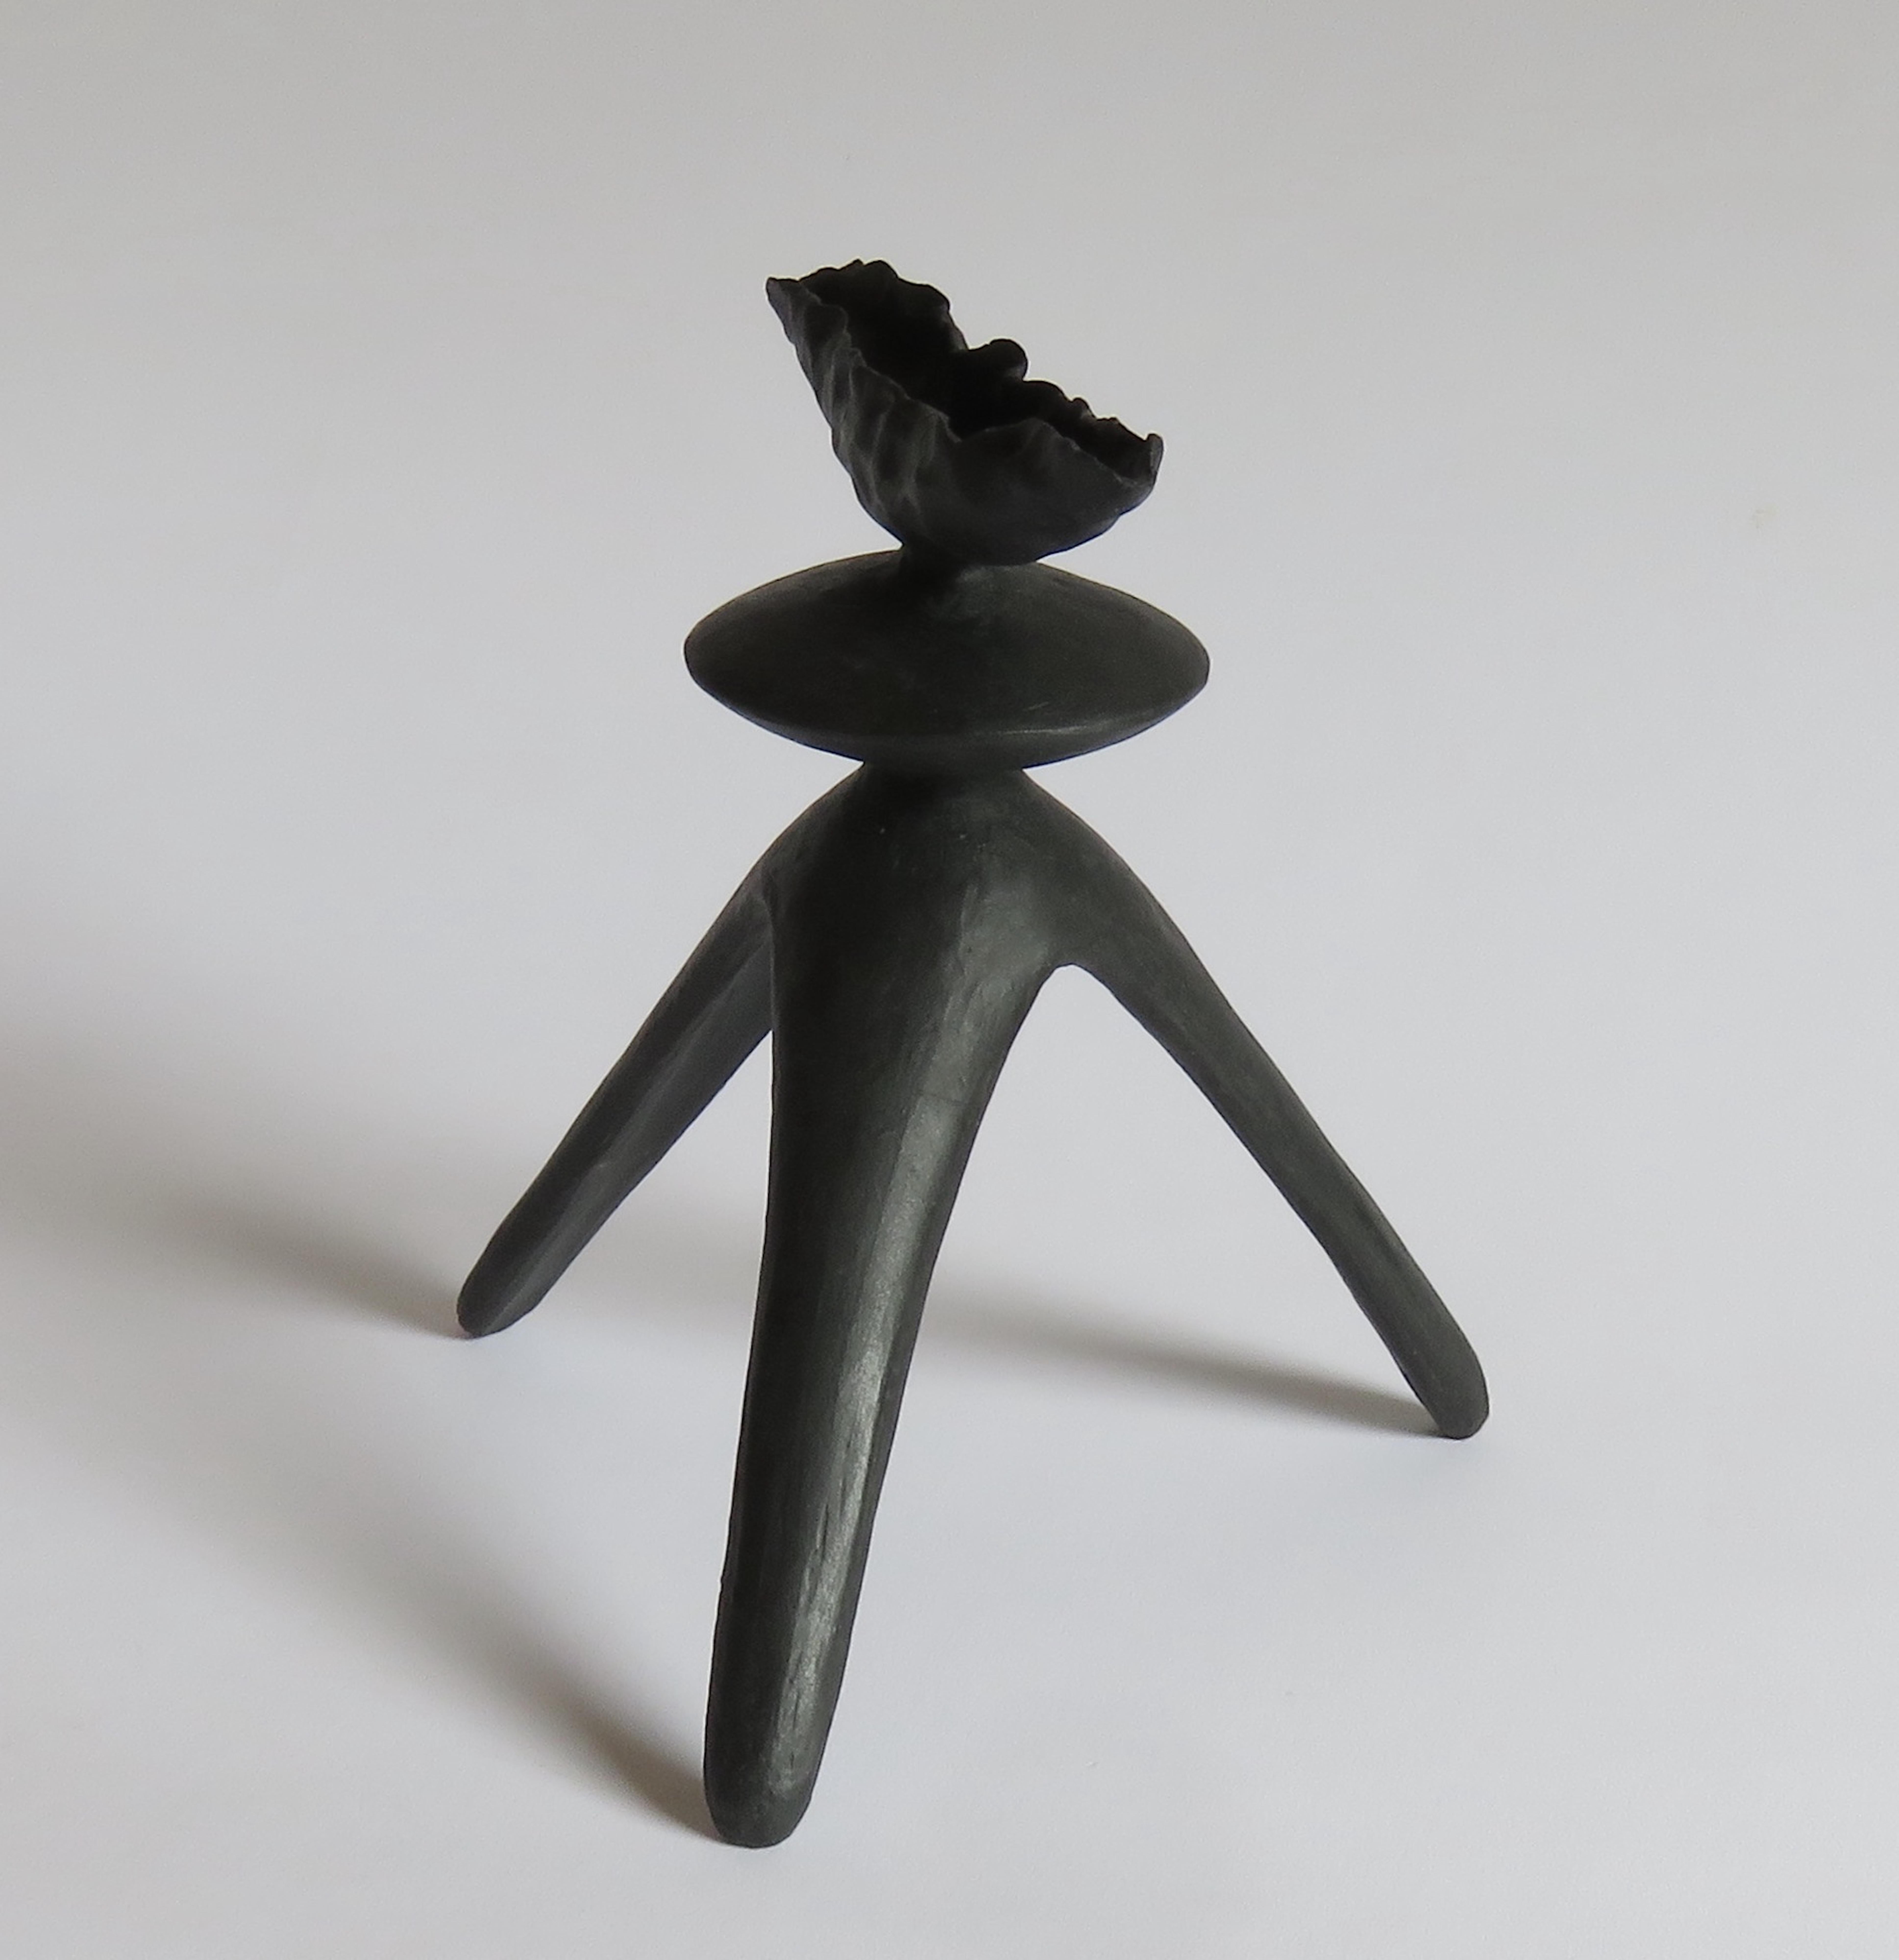 This matte black hand built ceramic TOTEM consists of a uniquely crimped top with a middle sphere on tripod legs. Part of a series of Modern Primitive Works. The dark brown stoneware clay is coated in a black underglaze to show all the hand markings